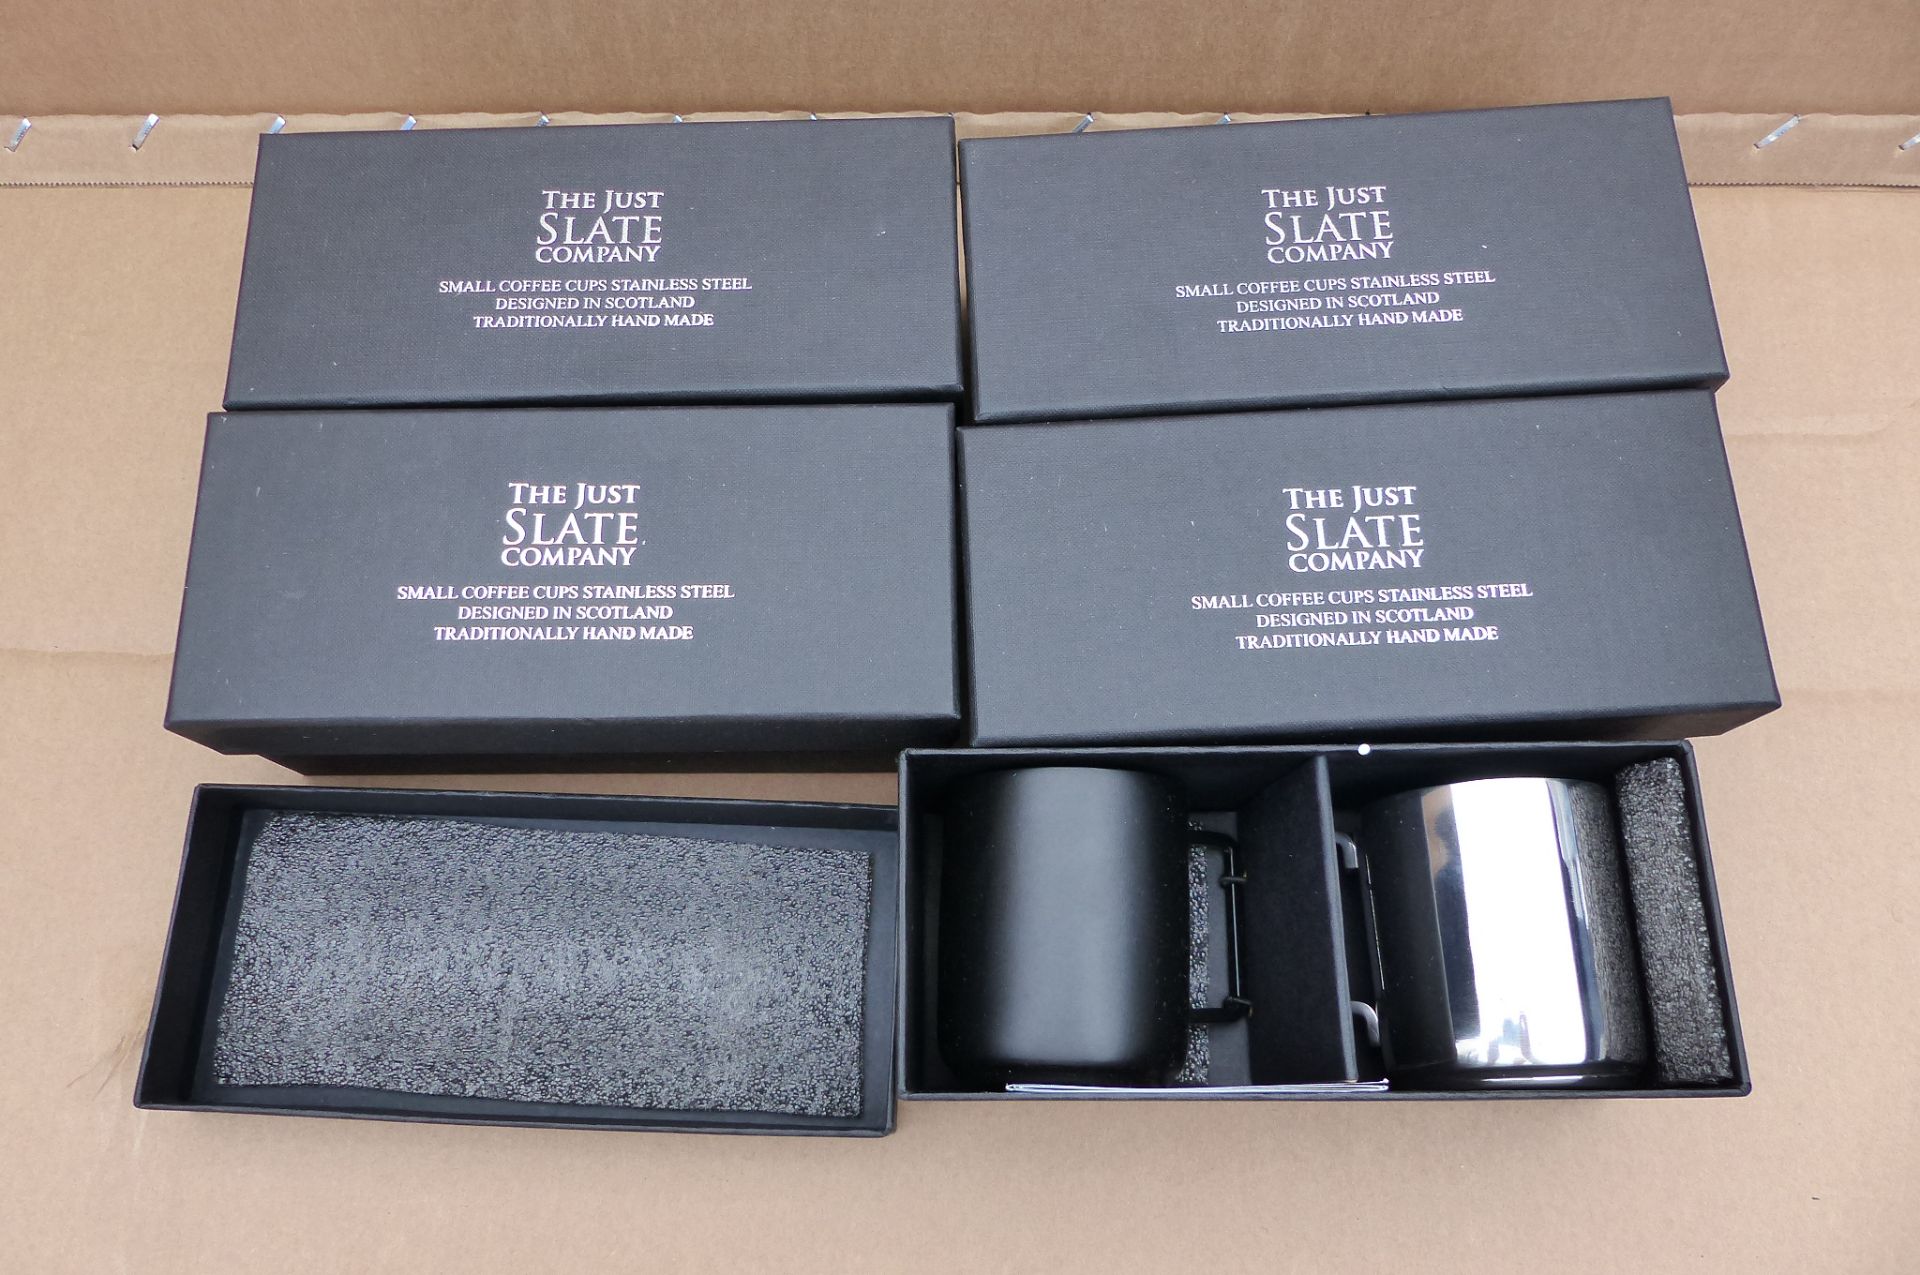 5 x Just Slate Company Black and Silver Mugs In gift box - Image 2 of 2